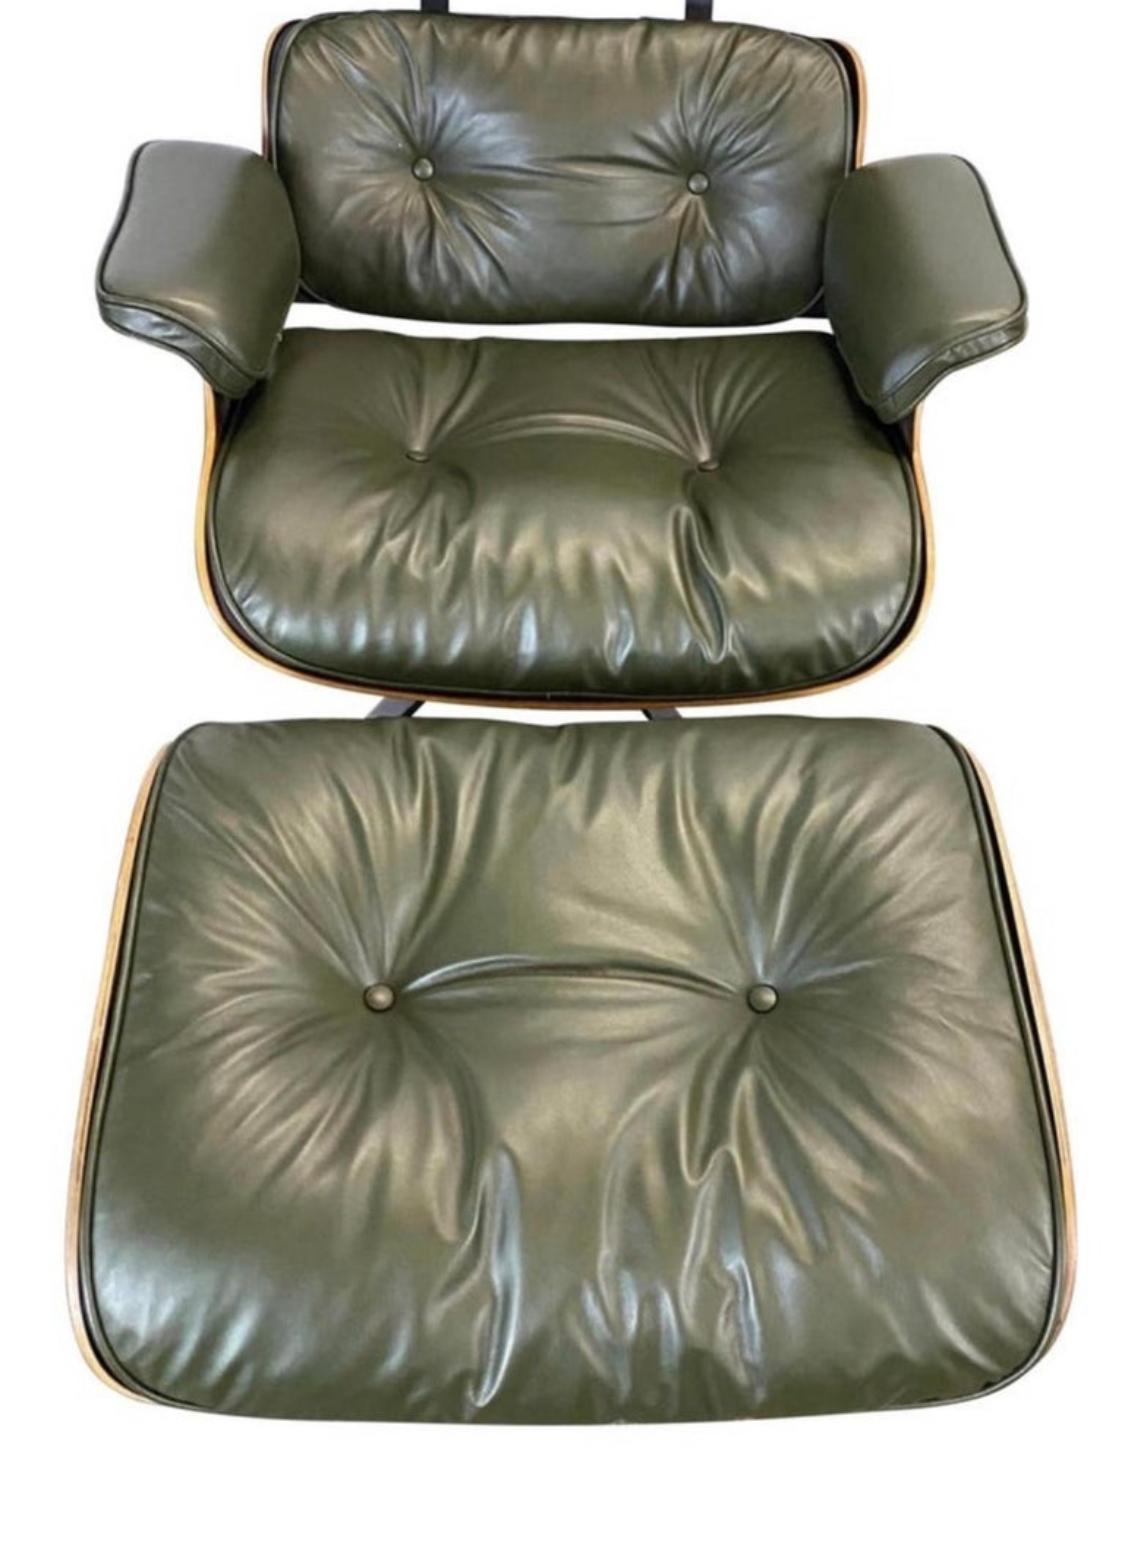 American Gorgeous Avocado Eames Lounge Chair and Ottoman For Sale